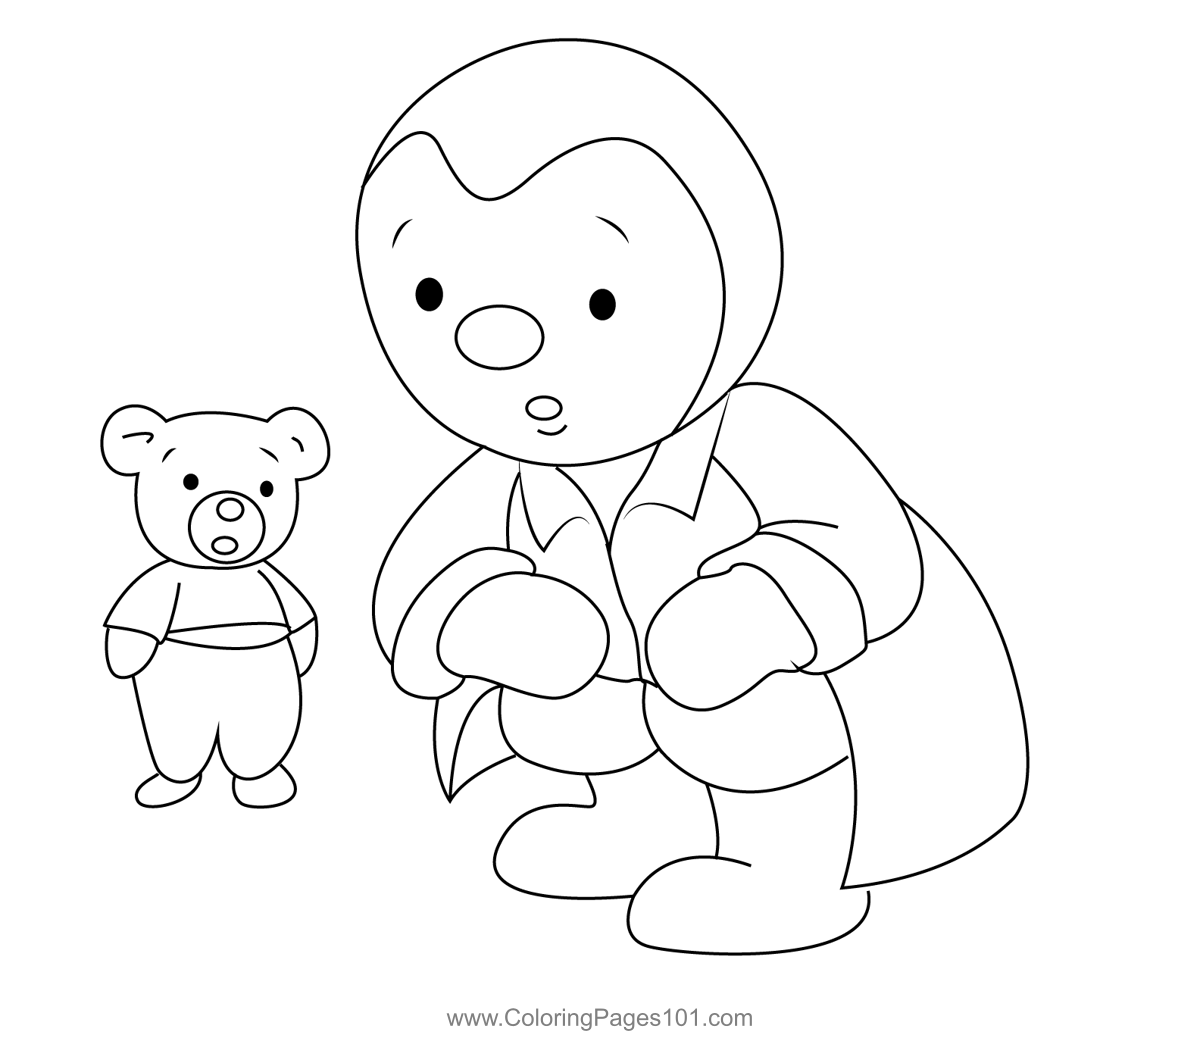 Sitting Charley And Mimmo Coloring Page for Kids - Free Charley and ...